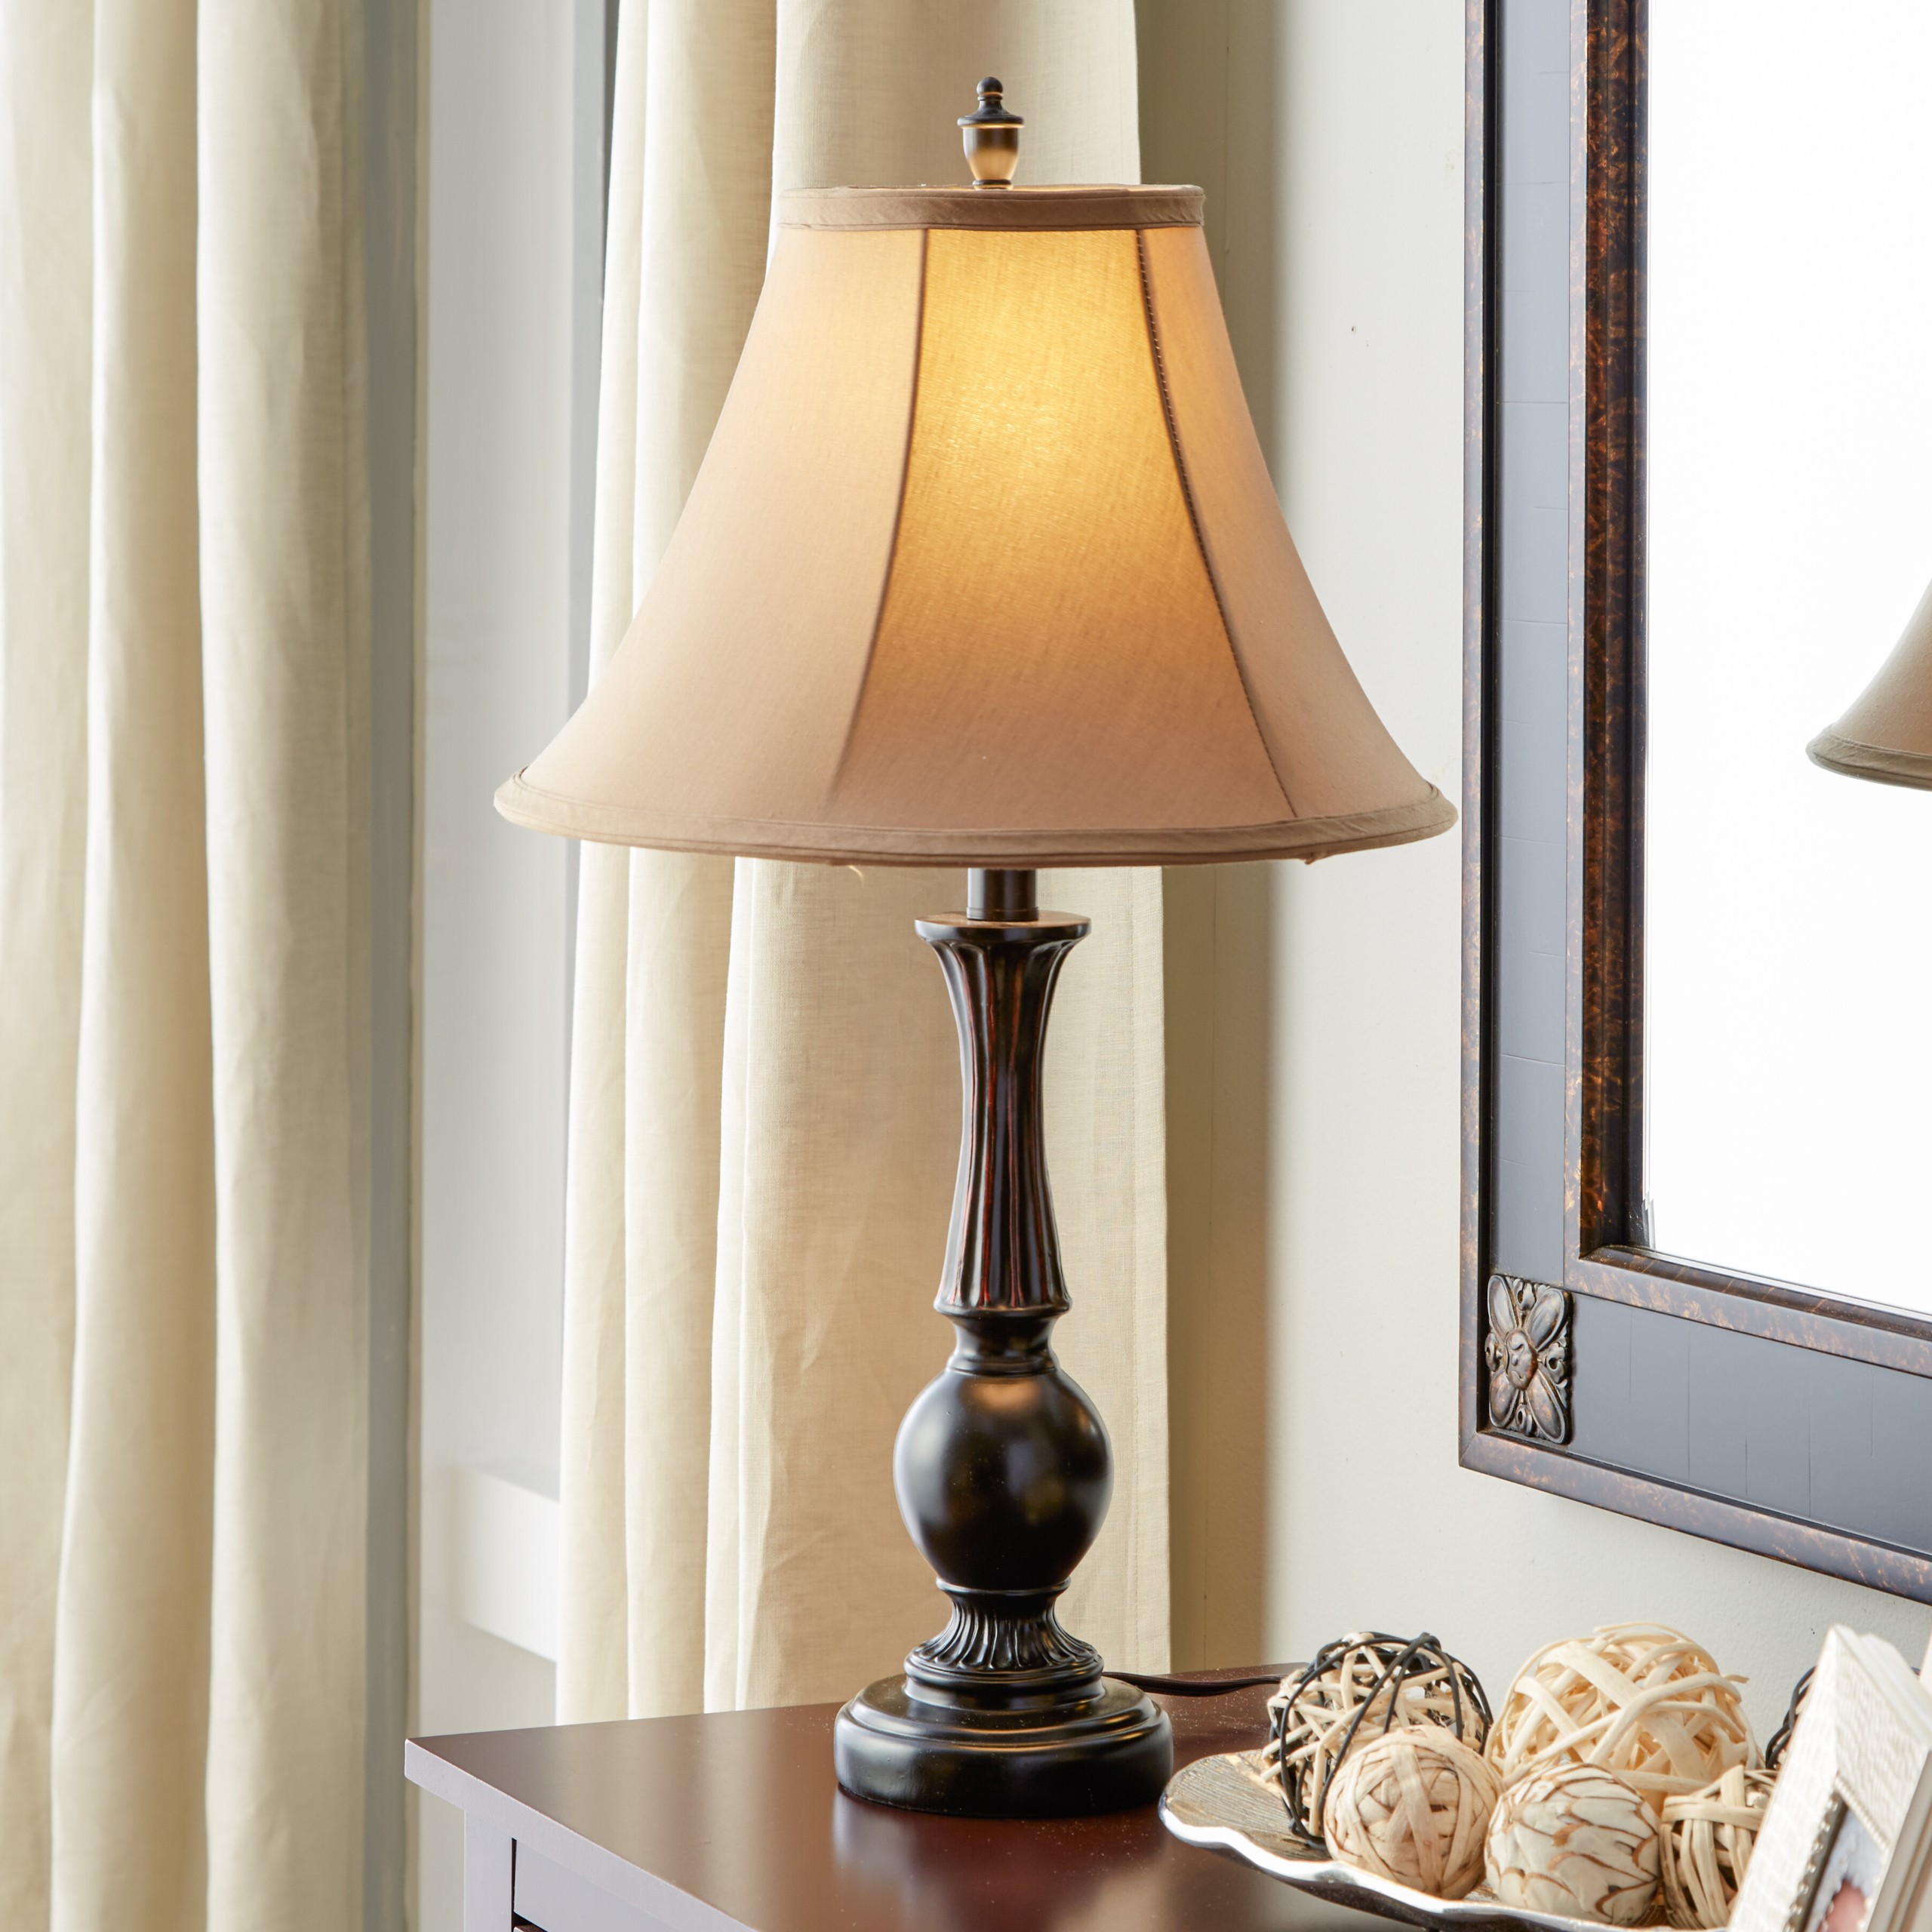 24" H Table Lamp with Bell Shade